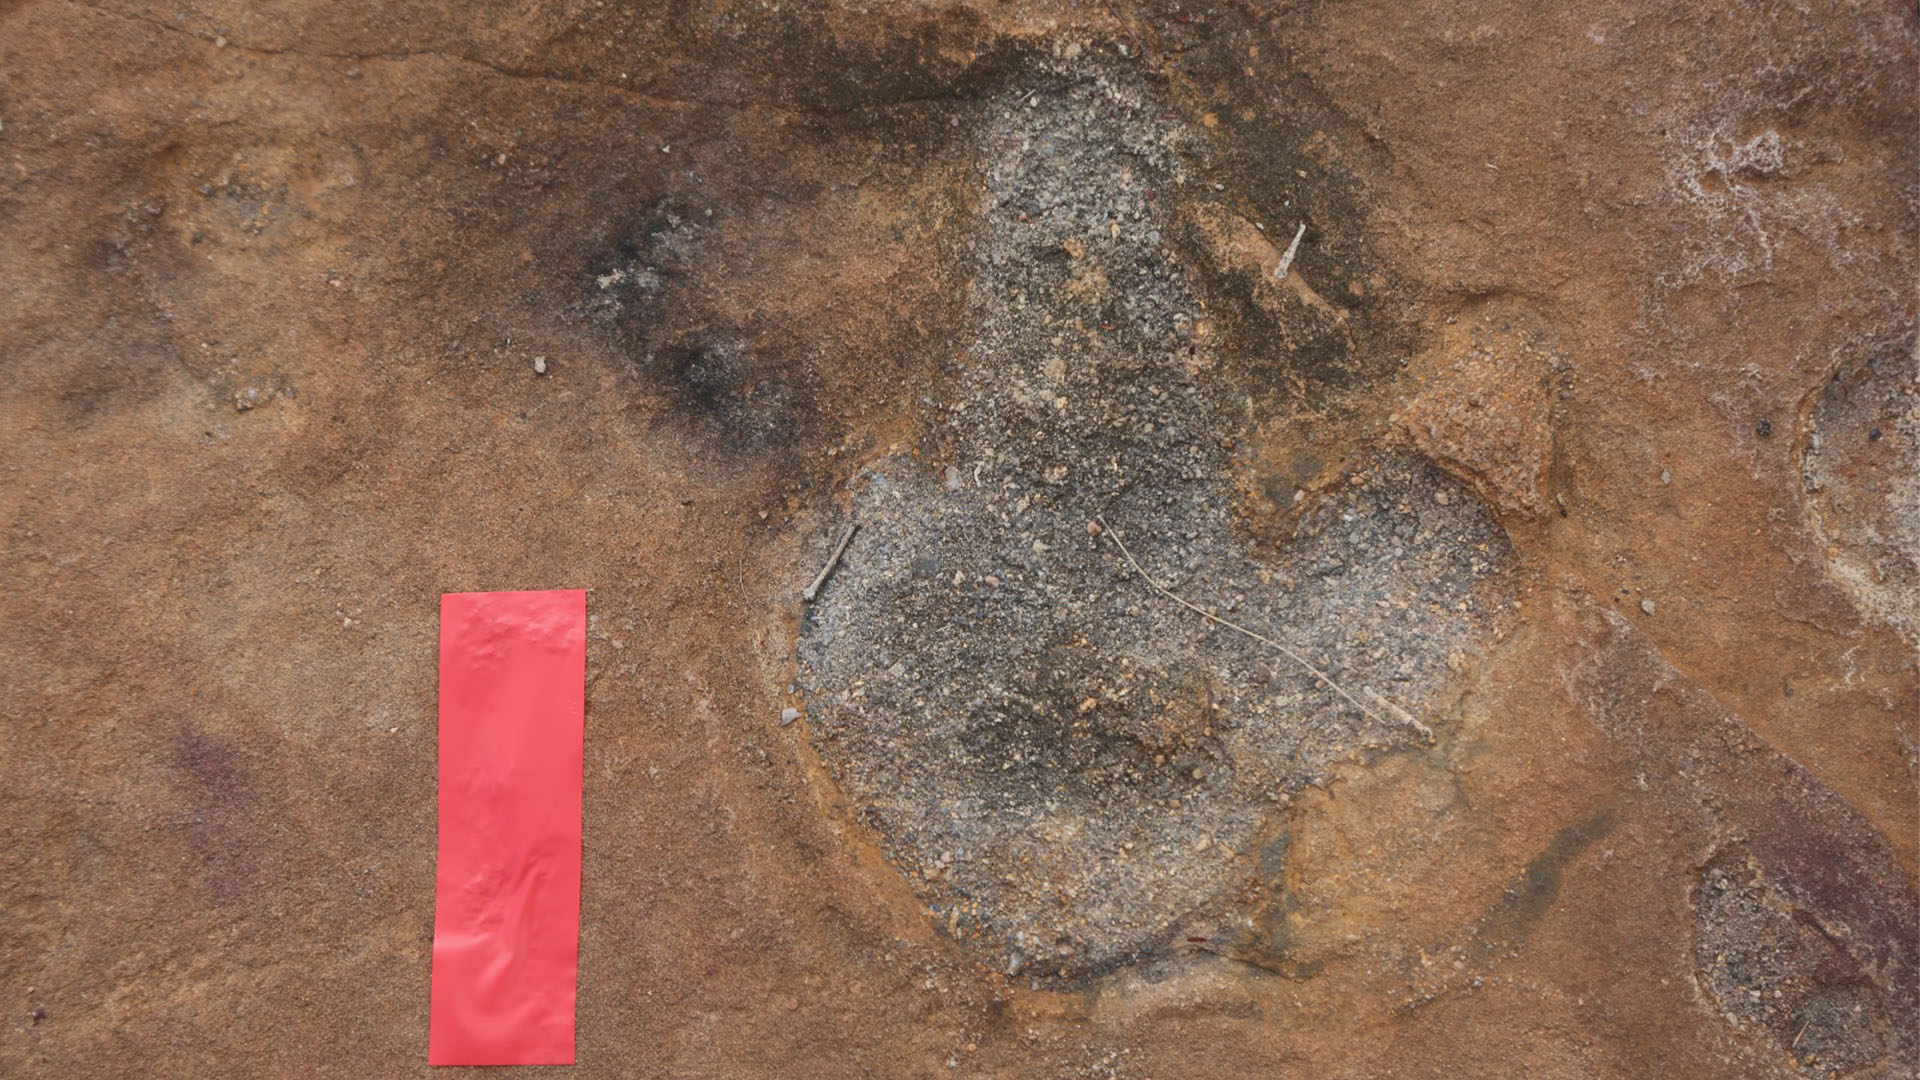 The site has dinosaur footprints from various beasts, including theropods, sauropods and ornithopods.